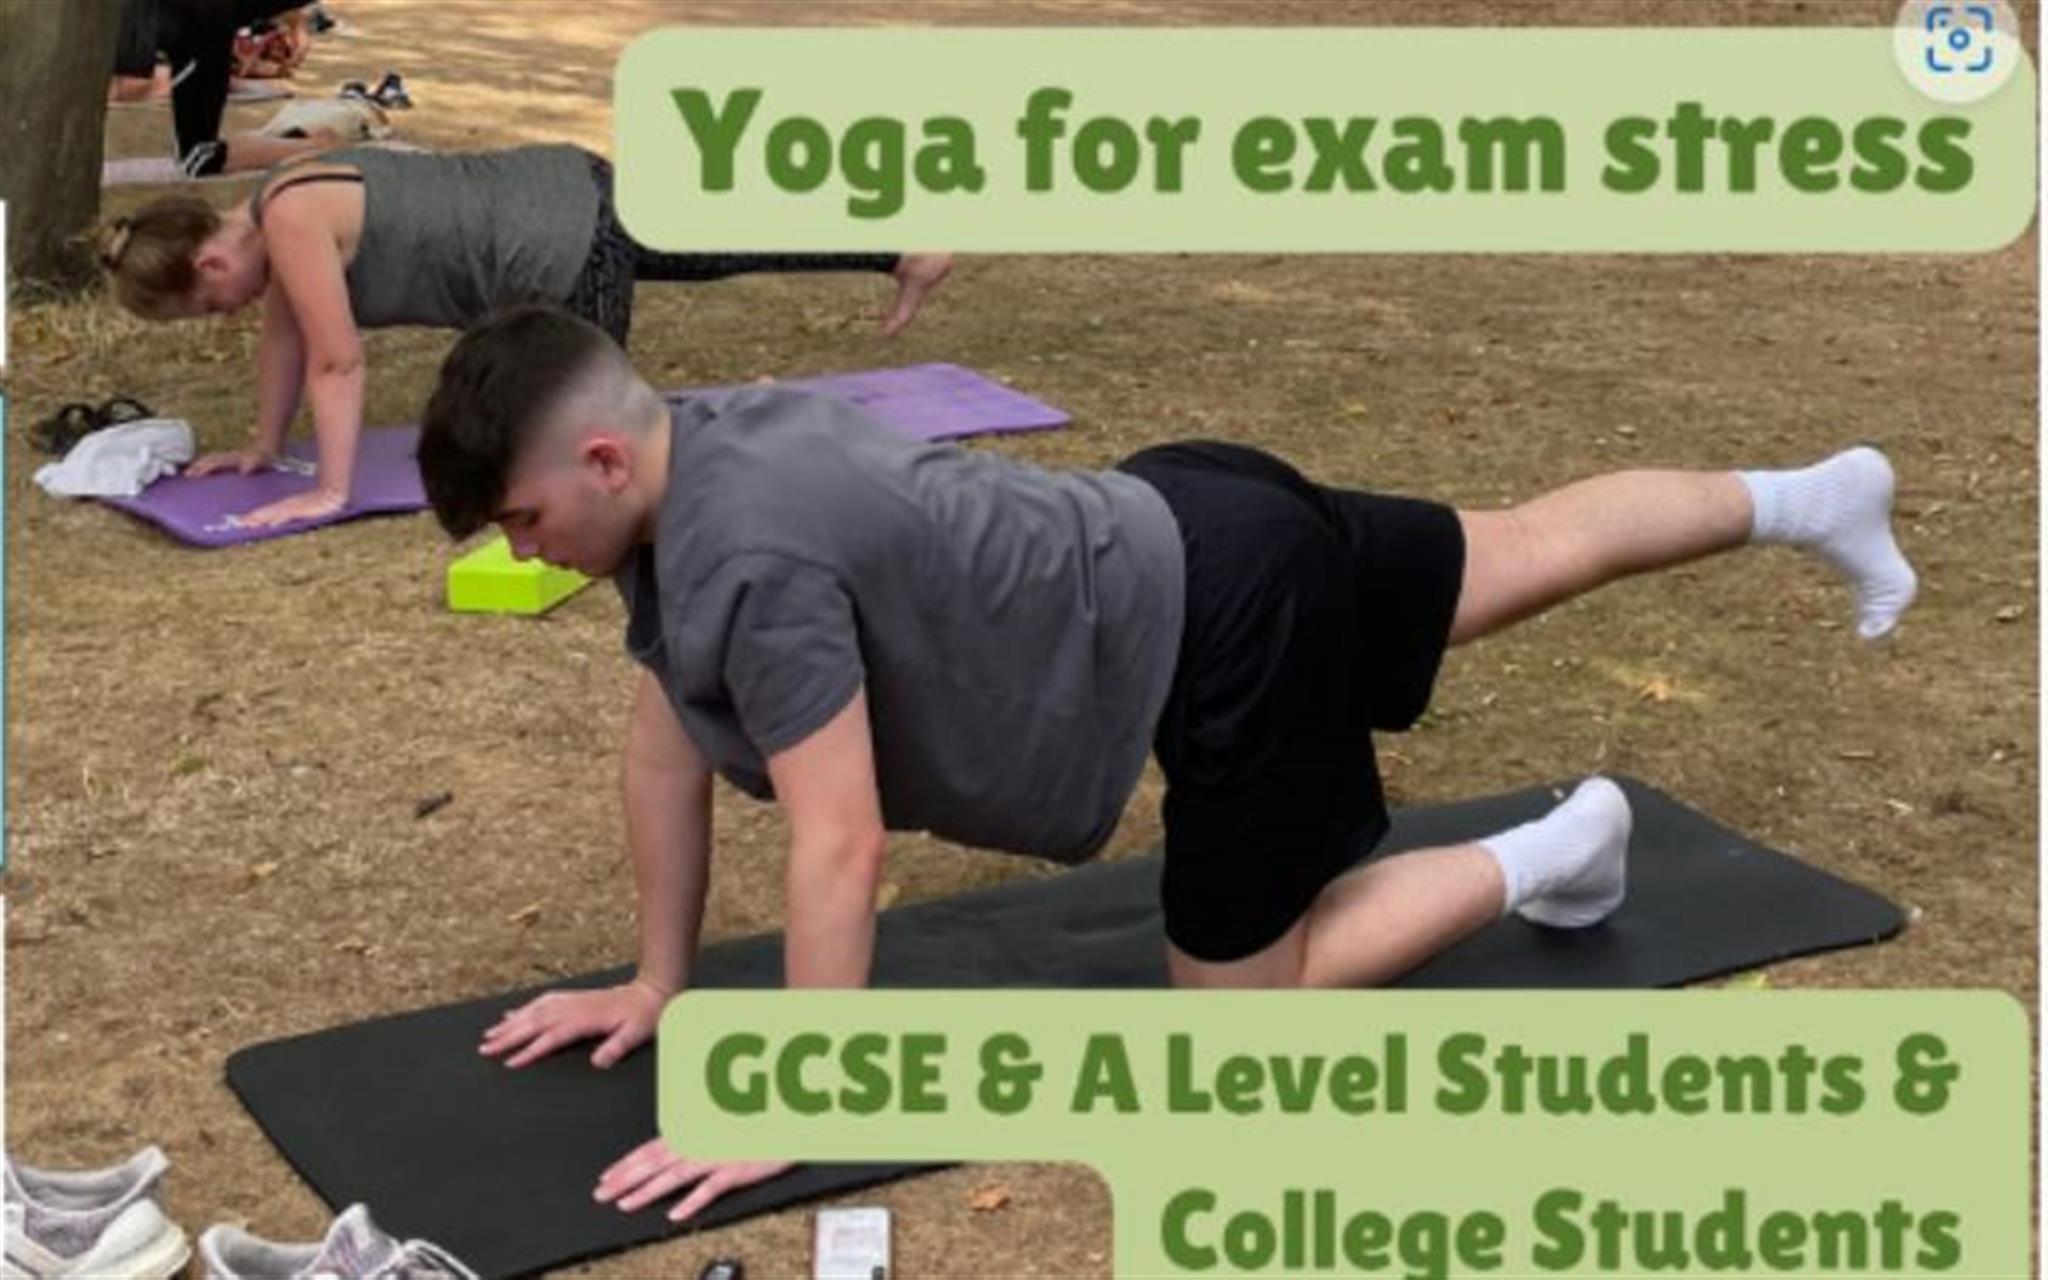 Yoga & Mindfulness for GCSE, A-level and College exams